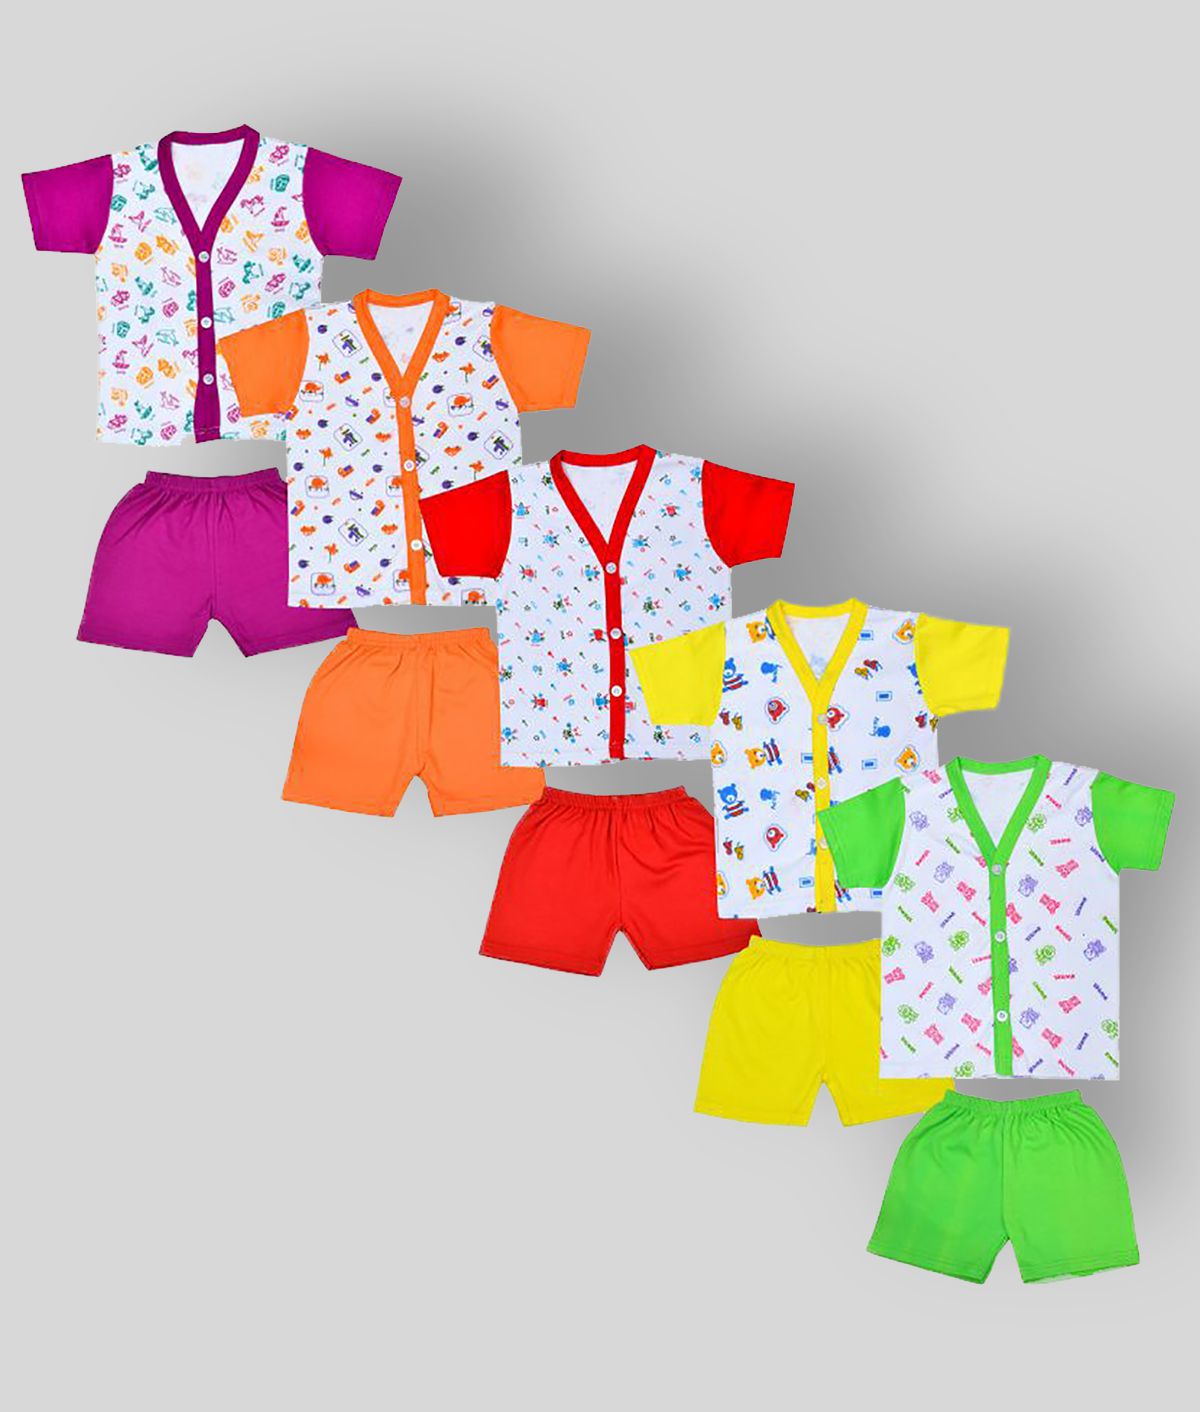 Sathiyas - Multicolor Cotton Top & Shorts For Baby Boy ( Pack of 5 )